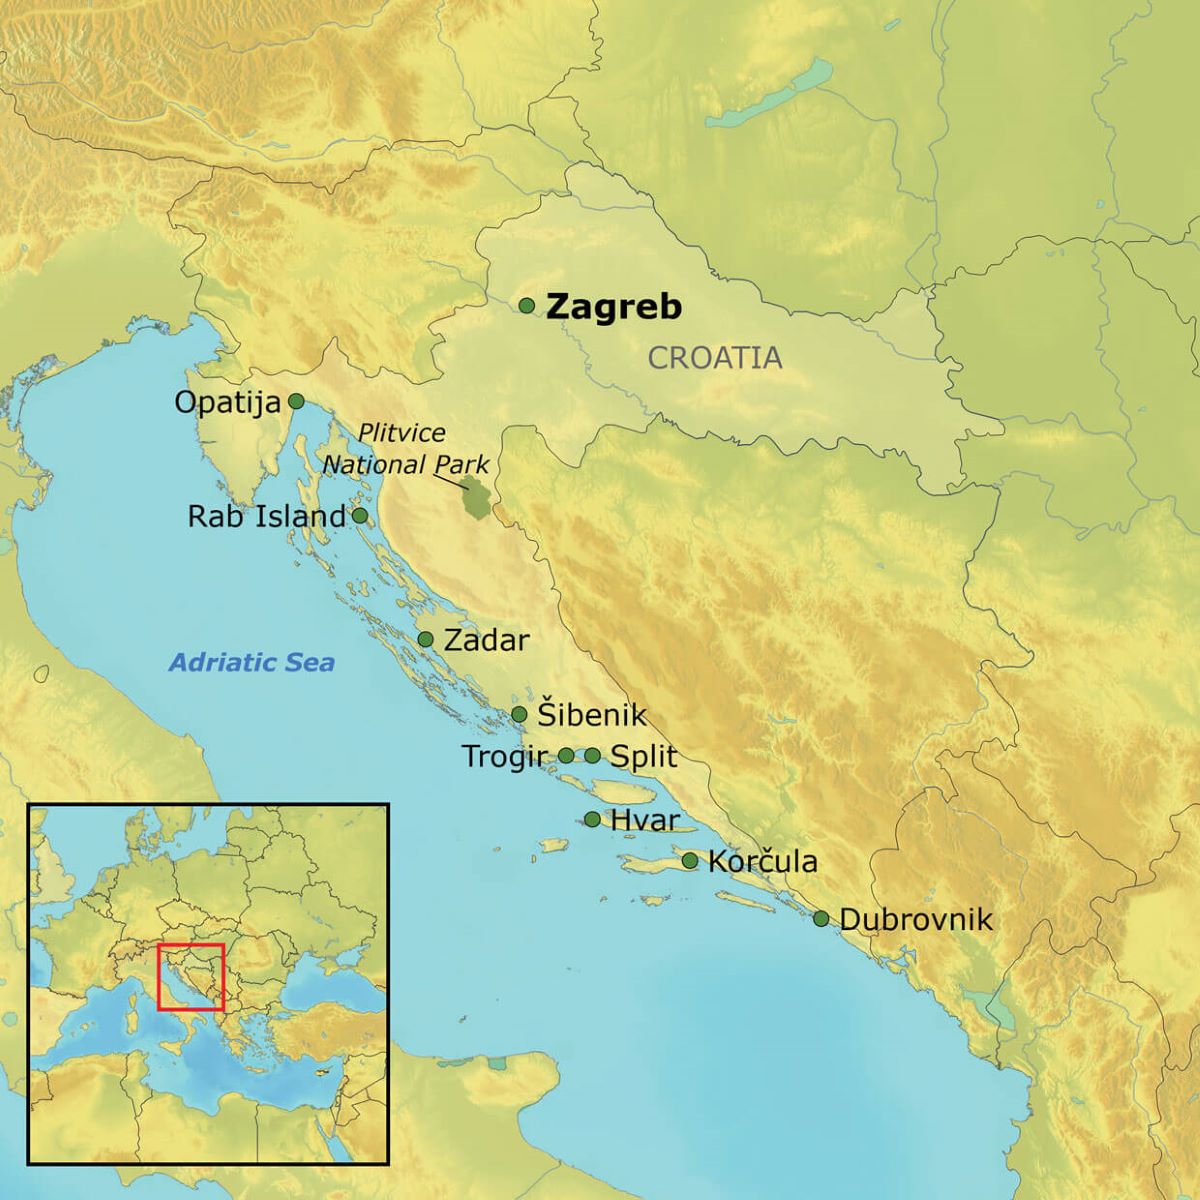 A map of Croatia with tour destinations pinned.